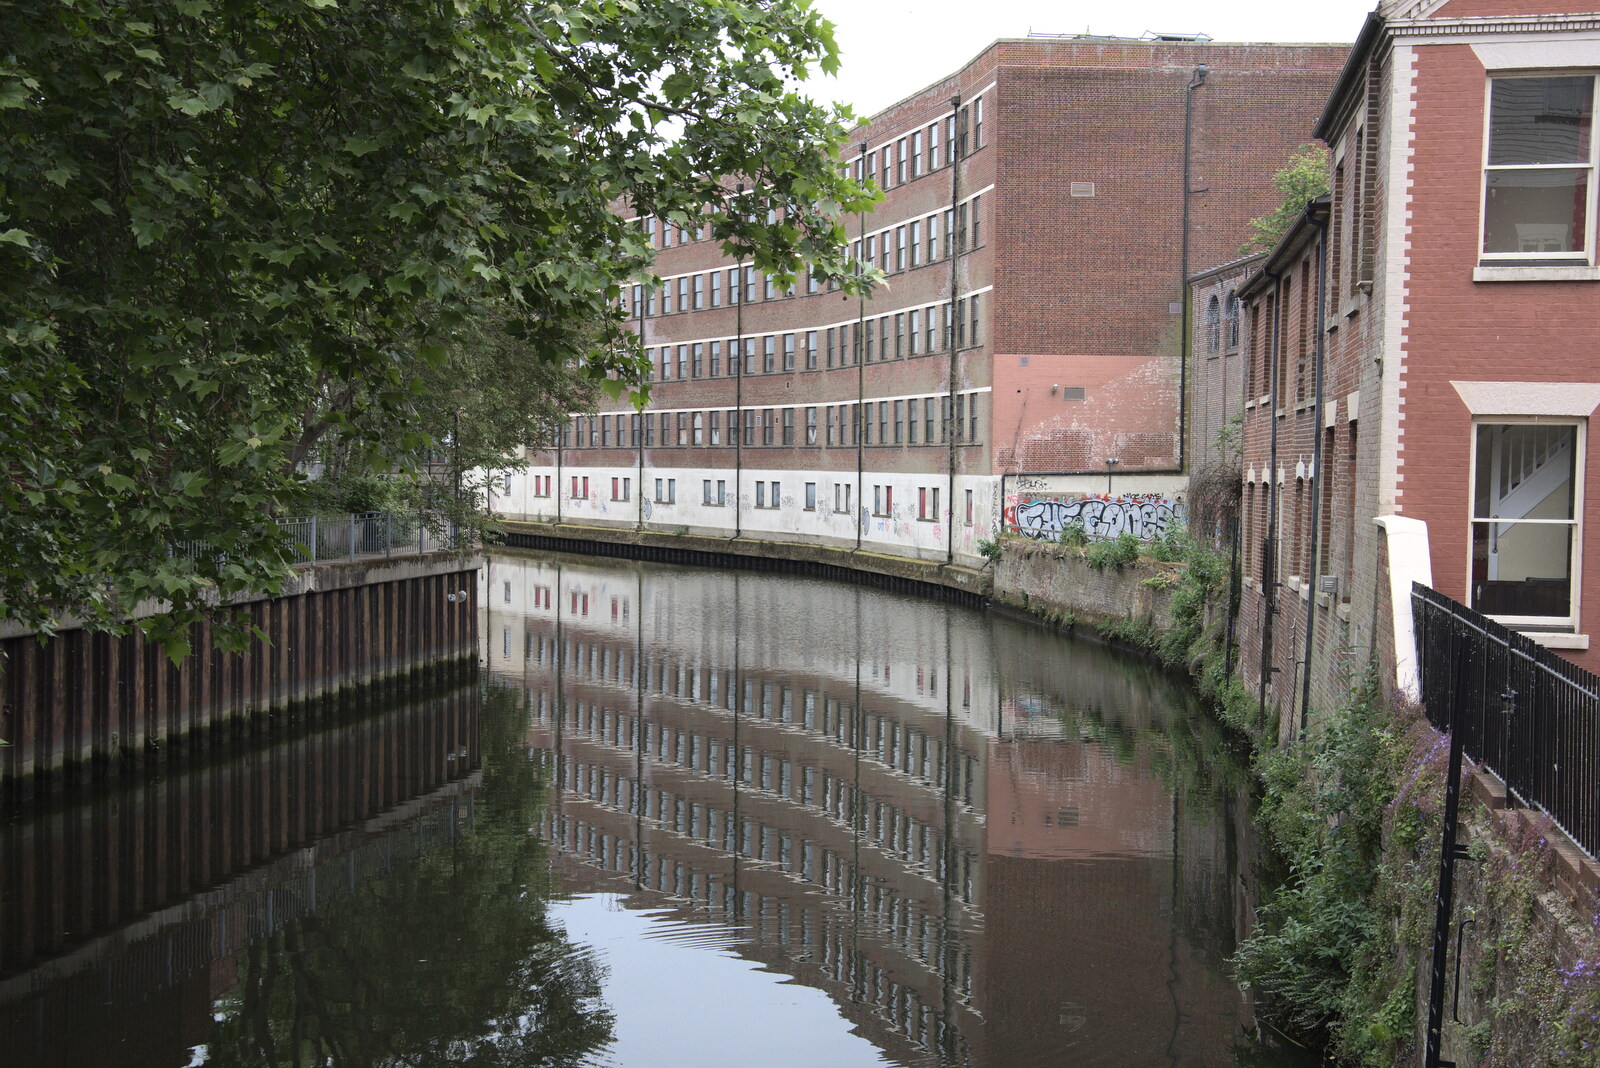 A nicely-reflected building on the Wensum from Discovering the Hidden City: Norwich, Norfolk - 23rd May 2022